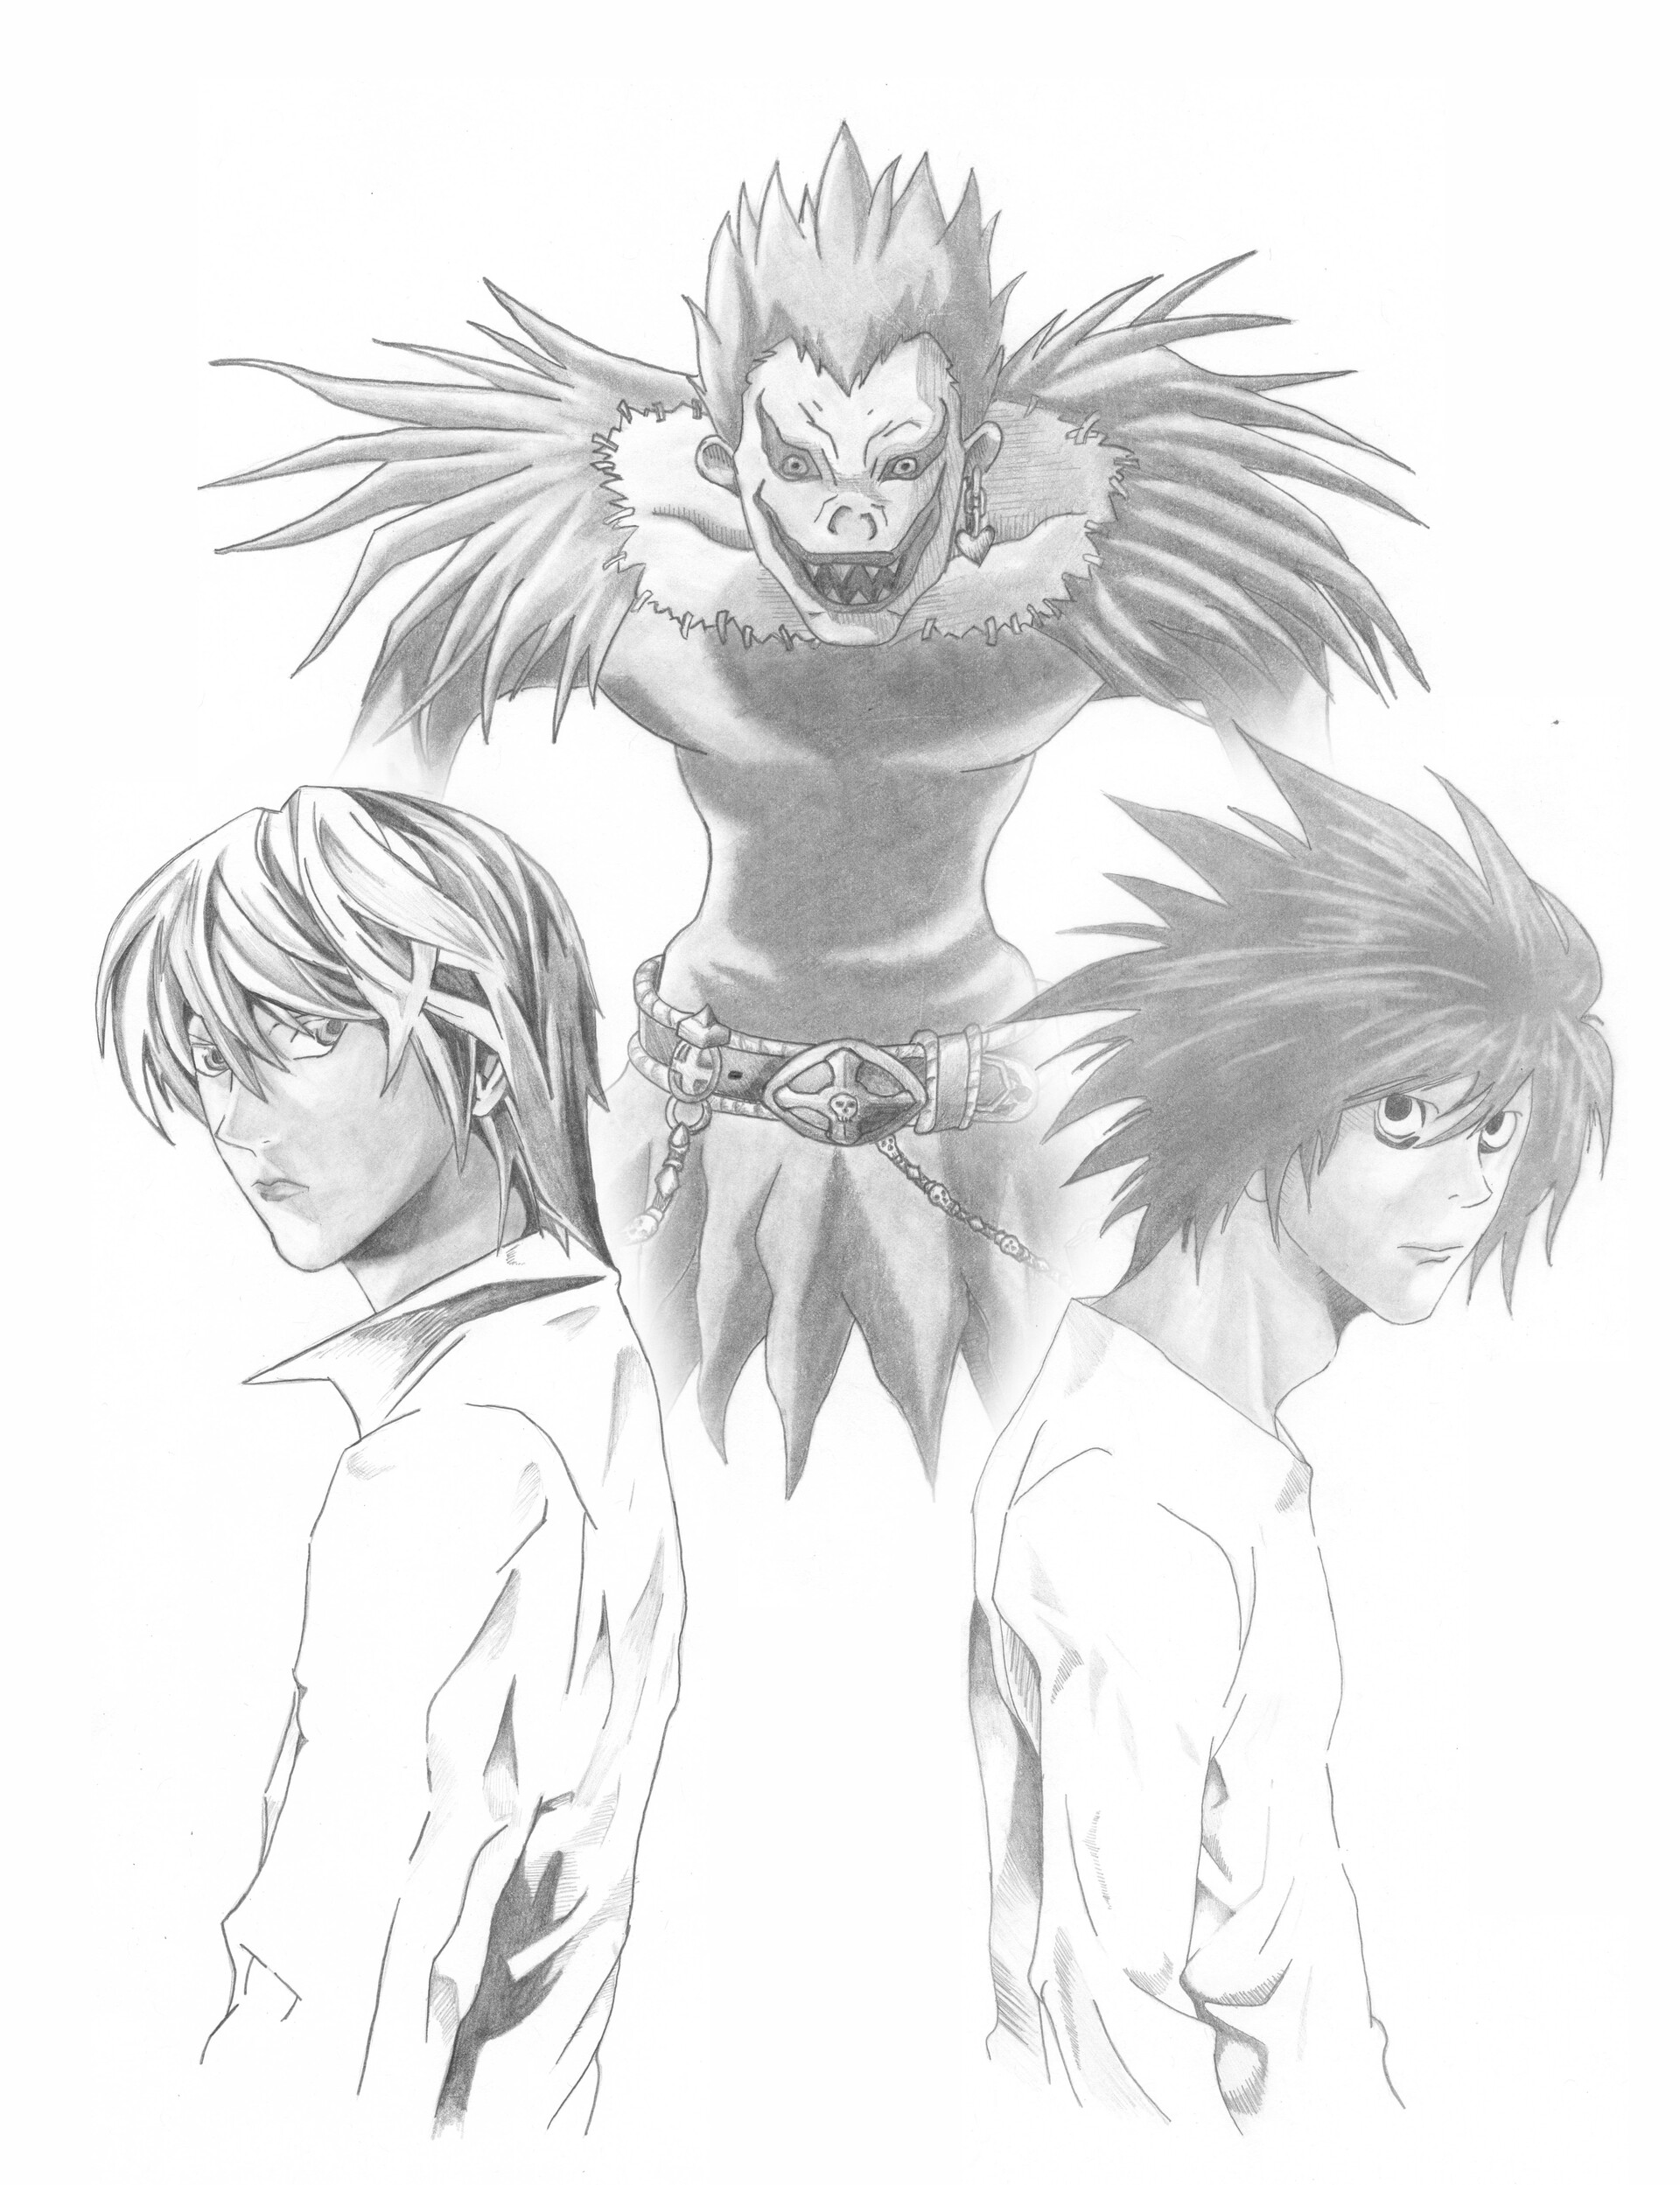 Draw you in death note anime style by Sennsennart_